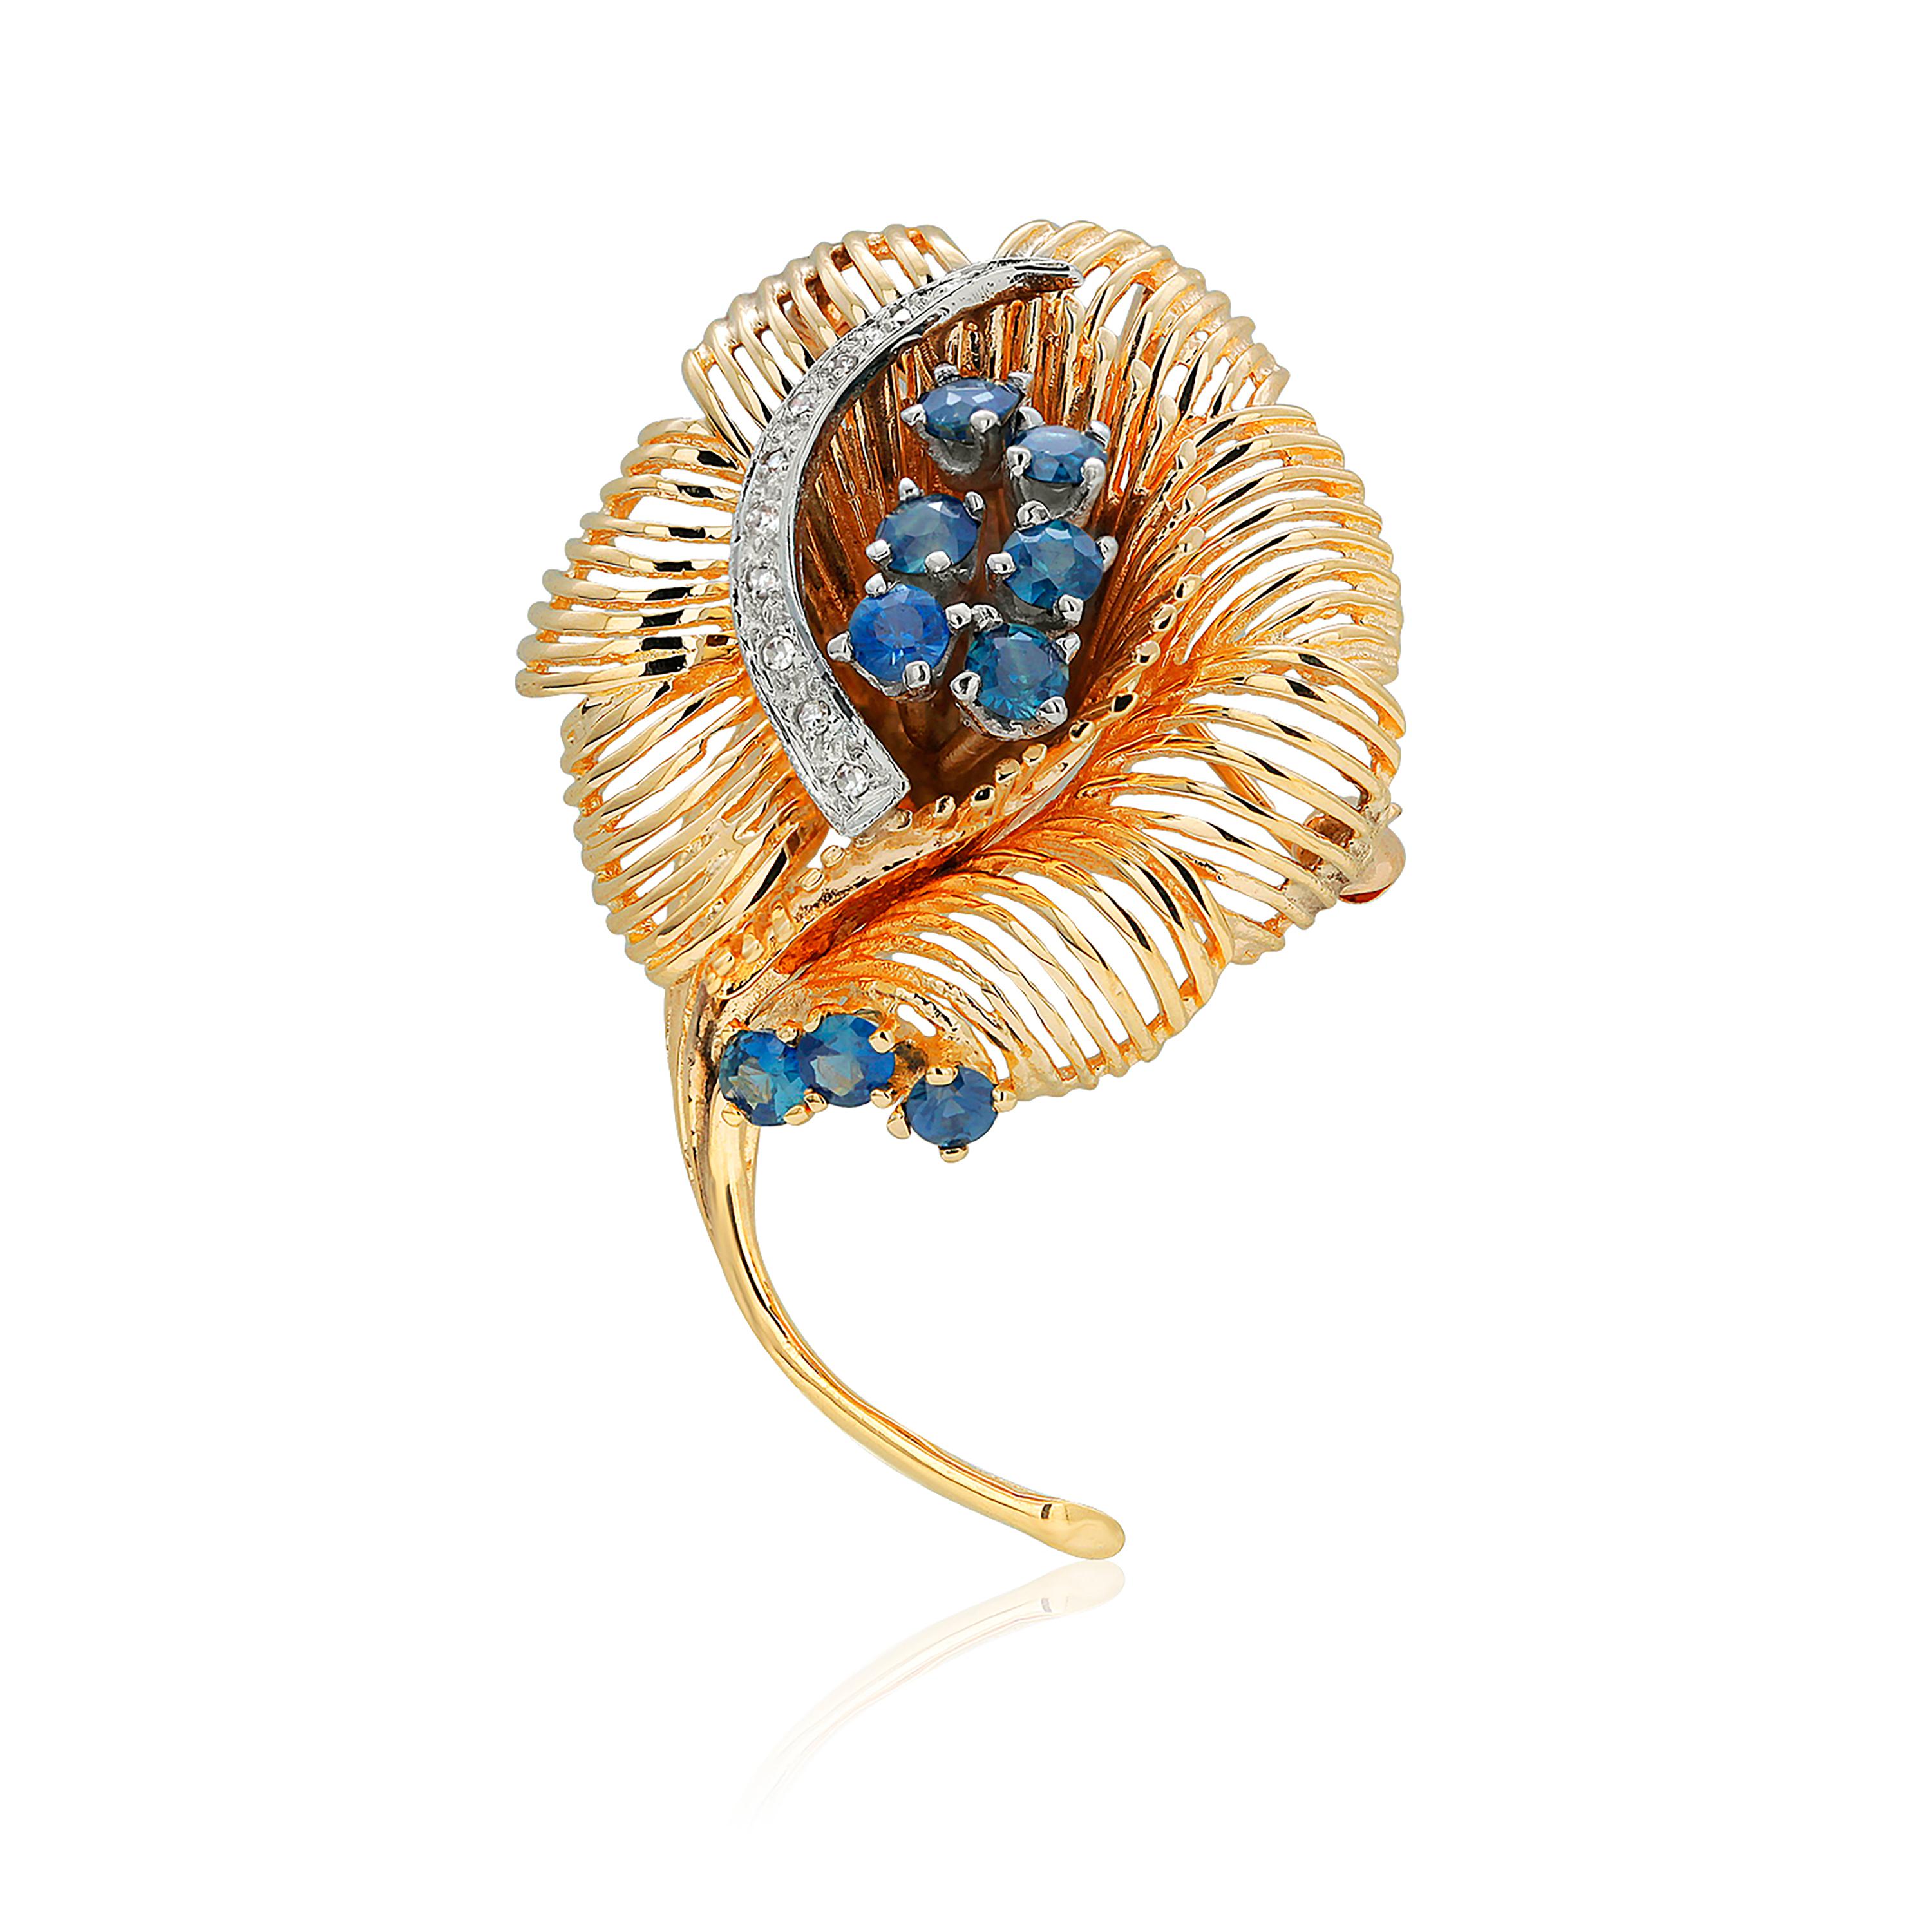 Fourteen Karat Yellow Gold Floral Brooch Pendant with Diamonds and Sapphires 1